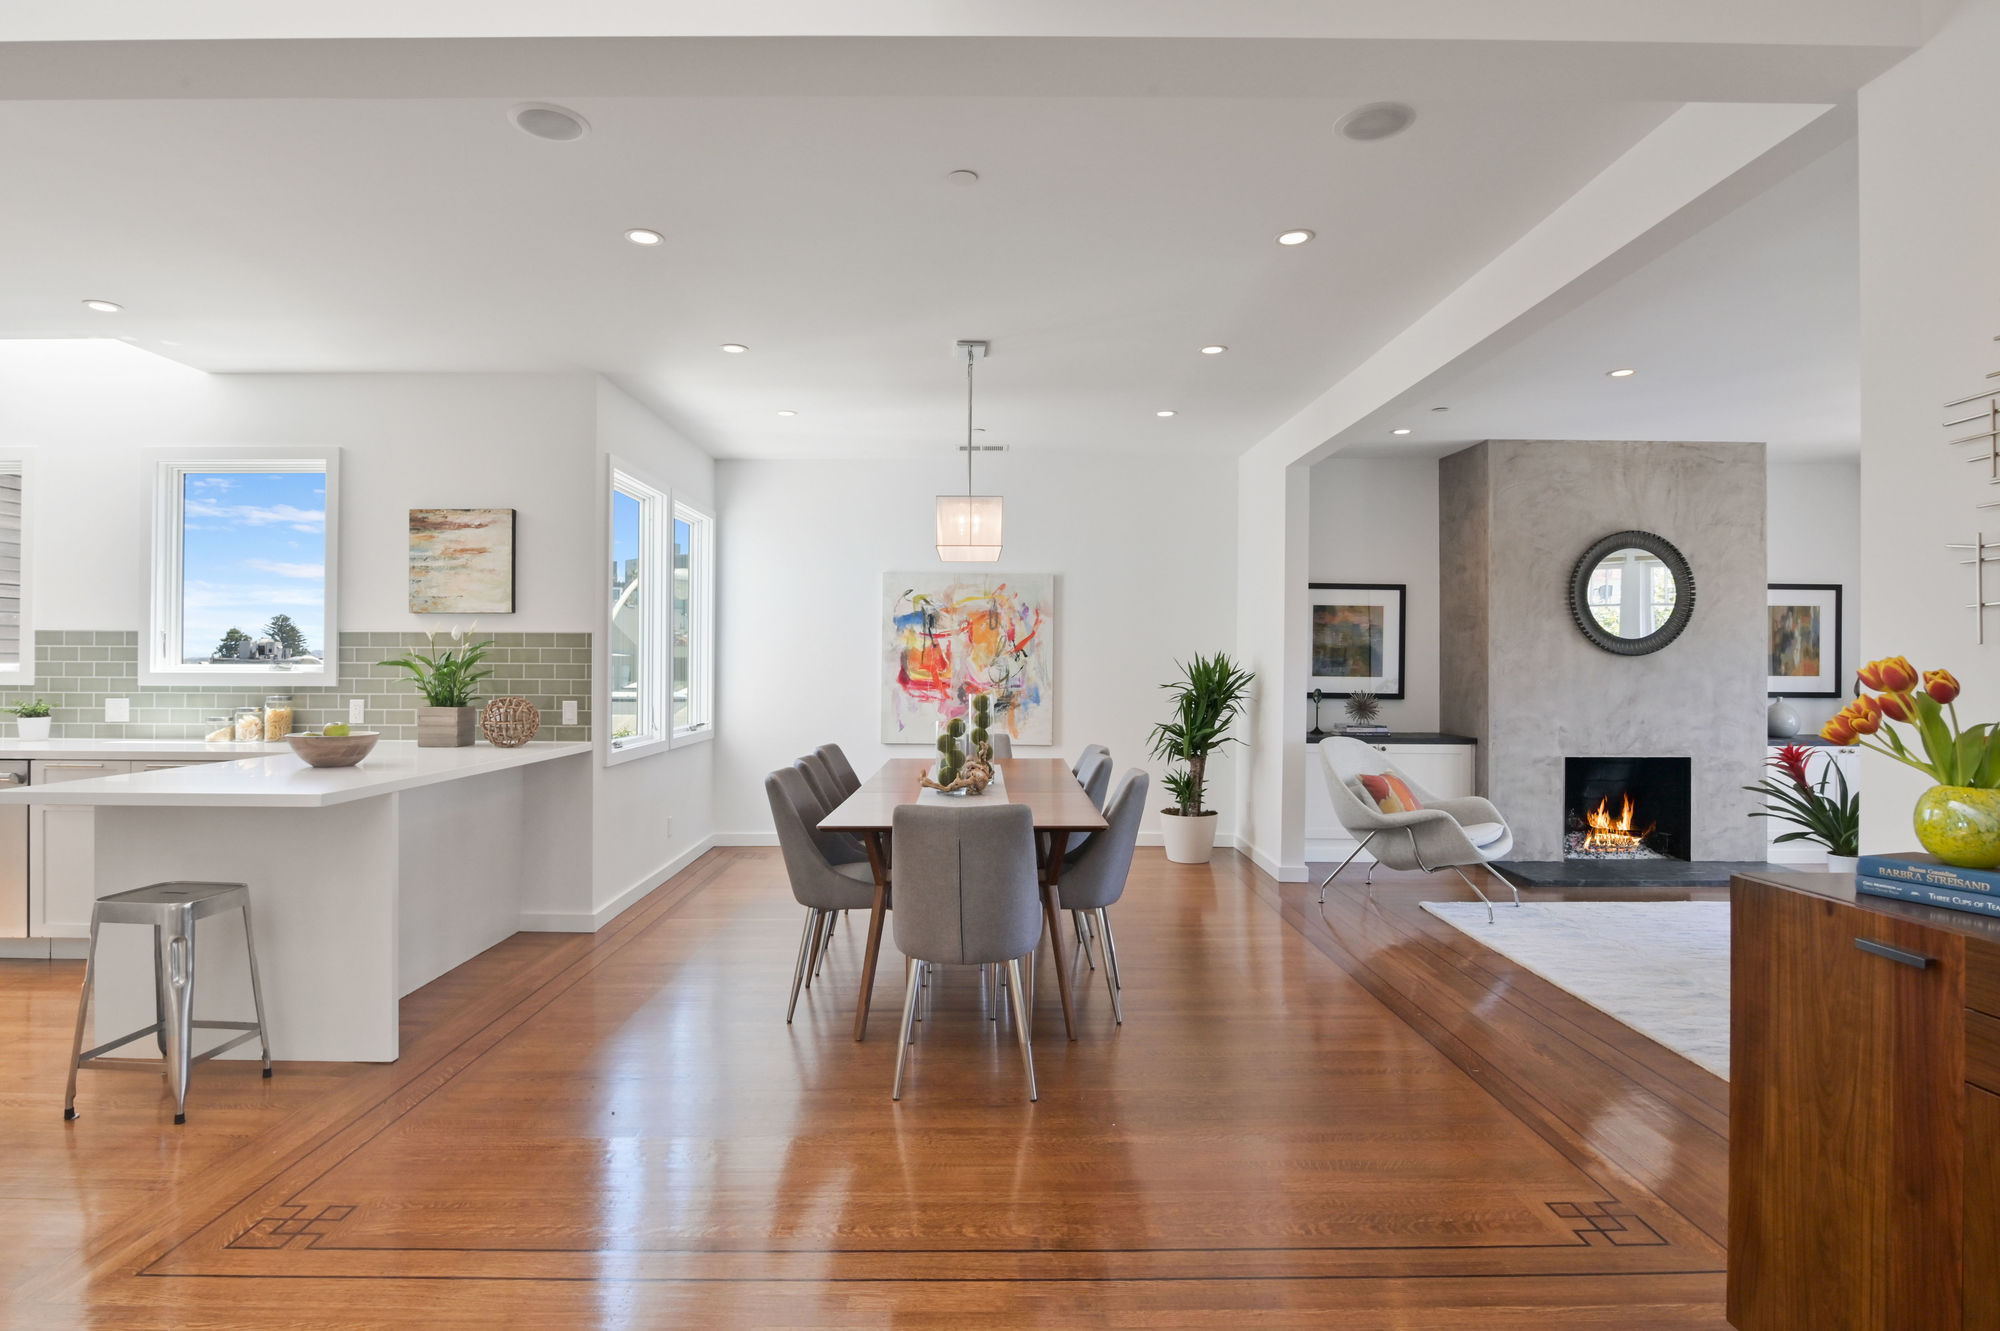 Property Photo: Open floor-plan view of 45-49 Belcher Street, showing the kitchen, dining, and living area